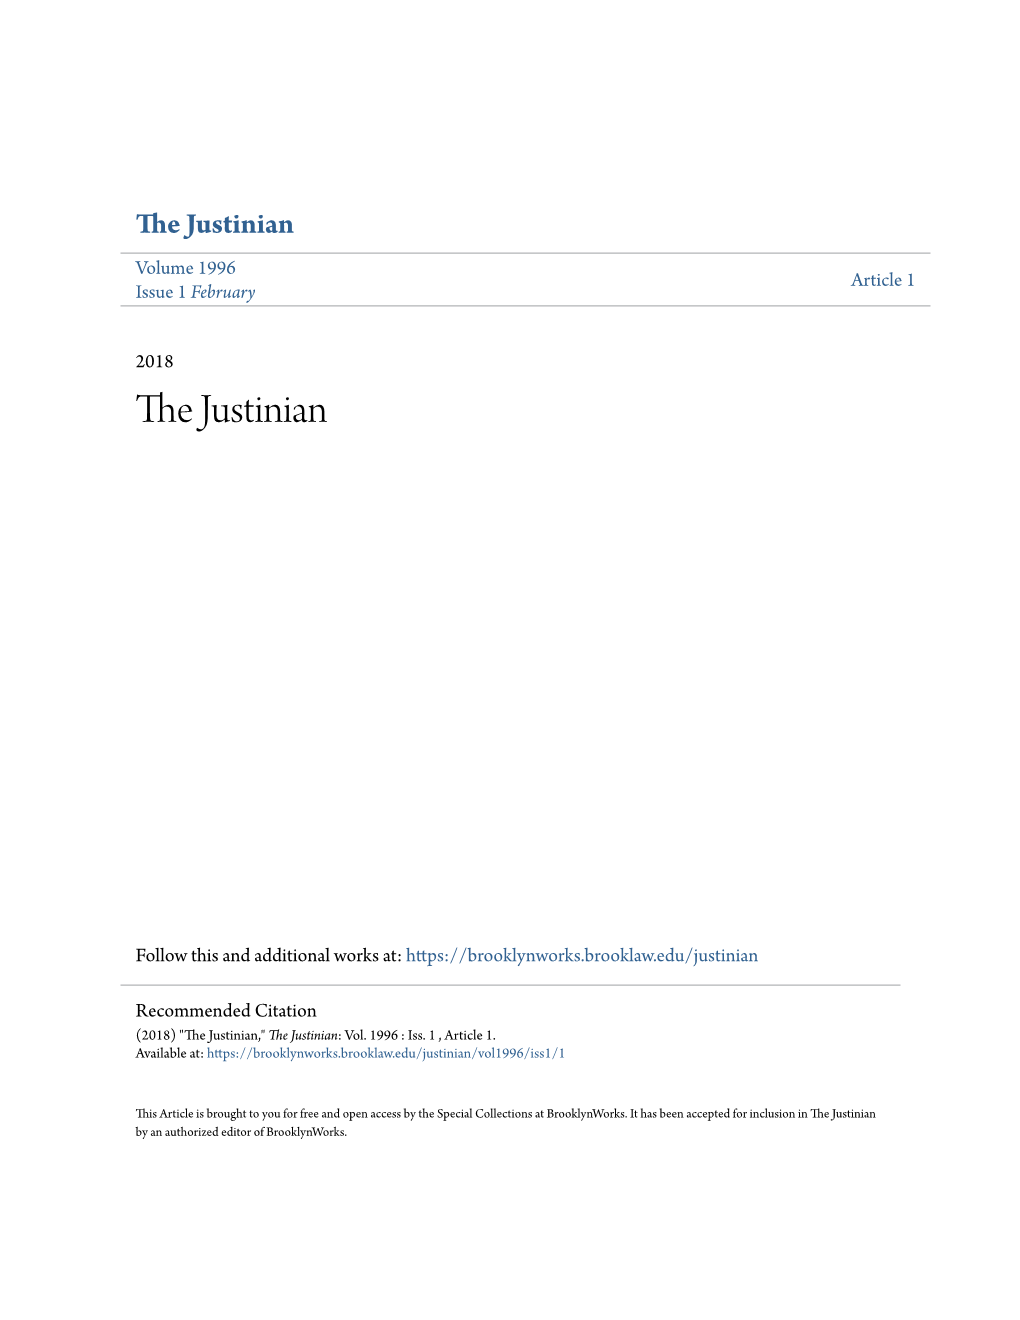 The Justinian Volume 1996 Article 1 Issue 1 February